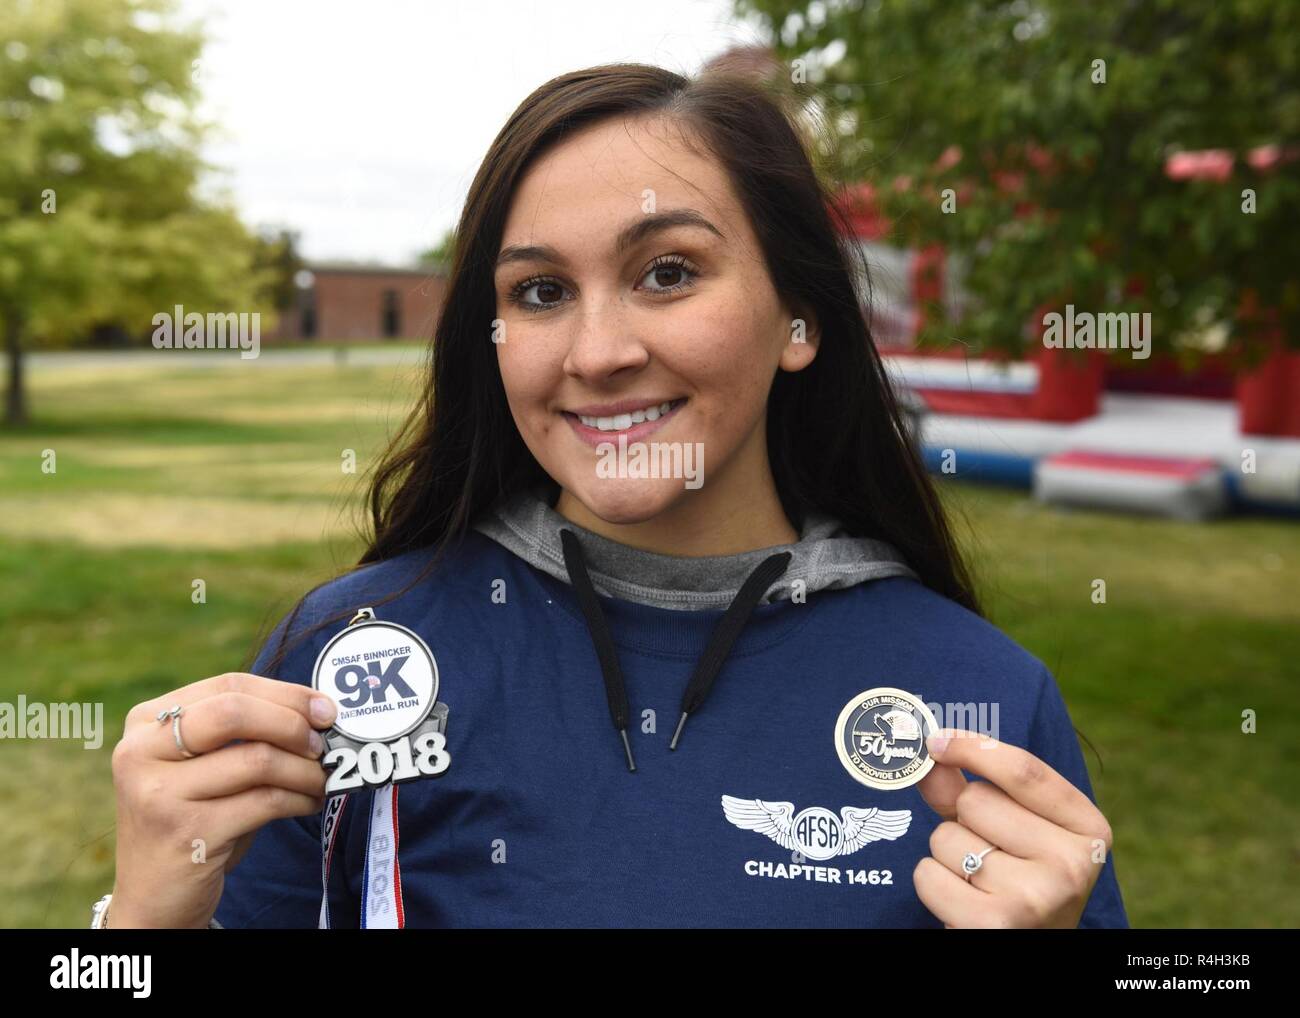 Airman Olivia Simione, 92nd Air Refueling Wing Religous Affairs chaplain assistant, poses with the CMSAF Binnicker 9K Memorial Run finisher's medallion and a 50th Anniversary Air Force Enlisted Village commemorative coin at Miller Park in Fairchild Air Force, Washington, Sept. 22, 2018. The AFEV is a nonprofit organization whose core mission is to provide a safe and secure home for survivng spouses of retired enlisted Airmen. Stock Photo